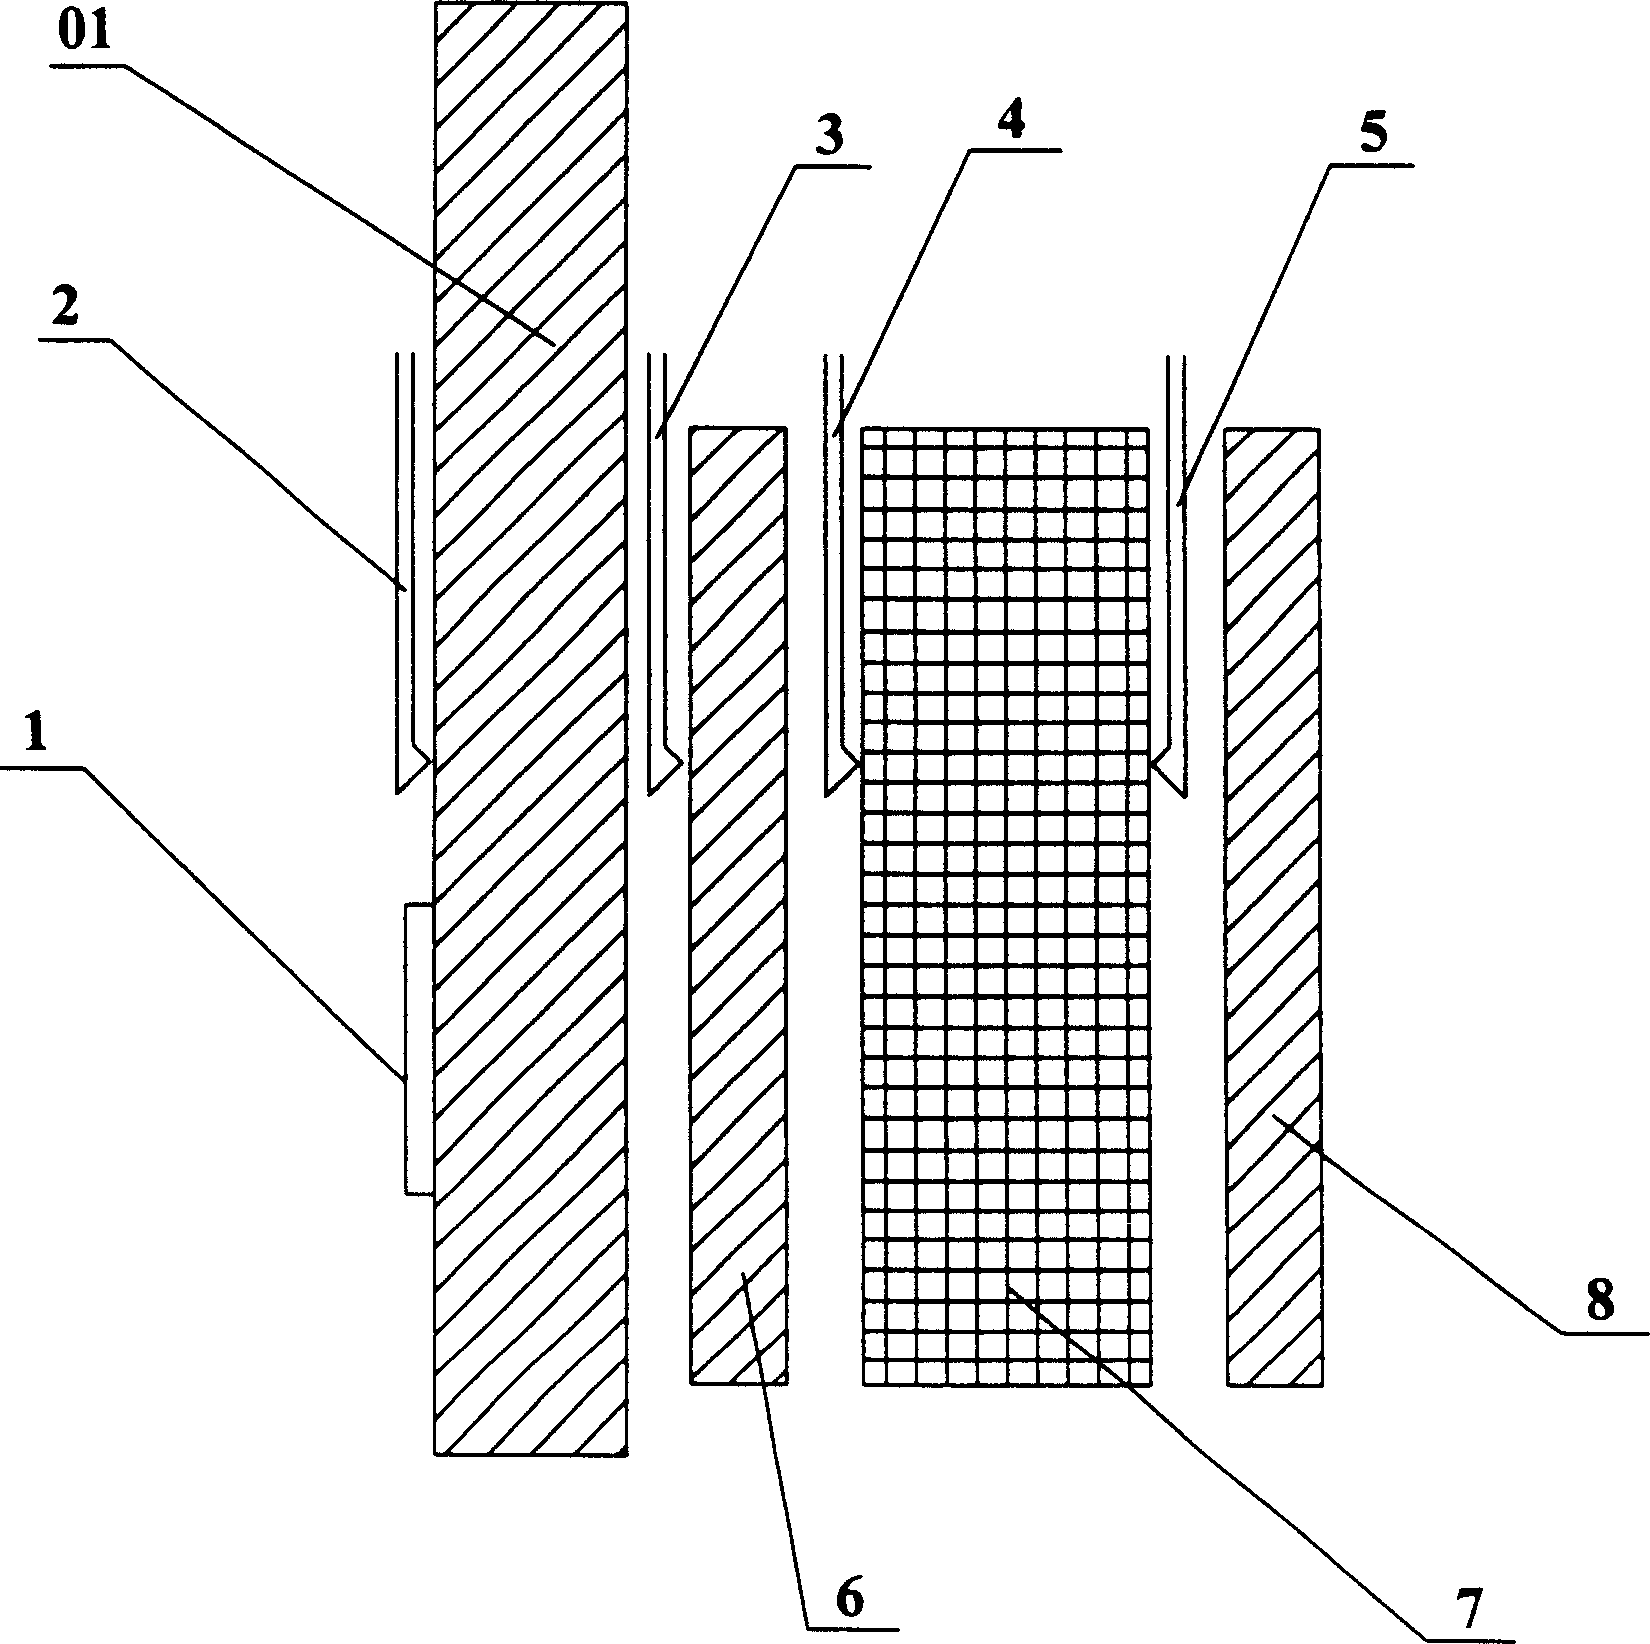 In site detecting method for building wall heat transfer coefficient